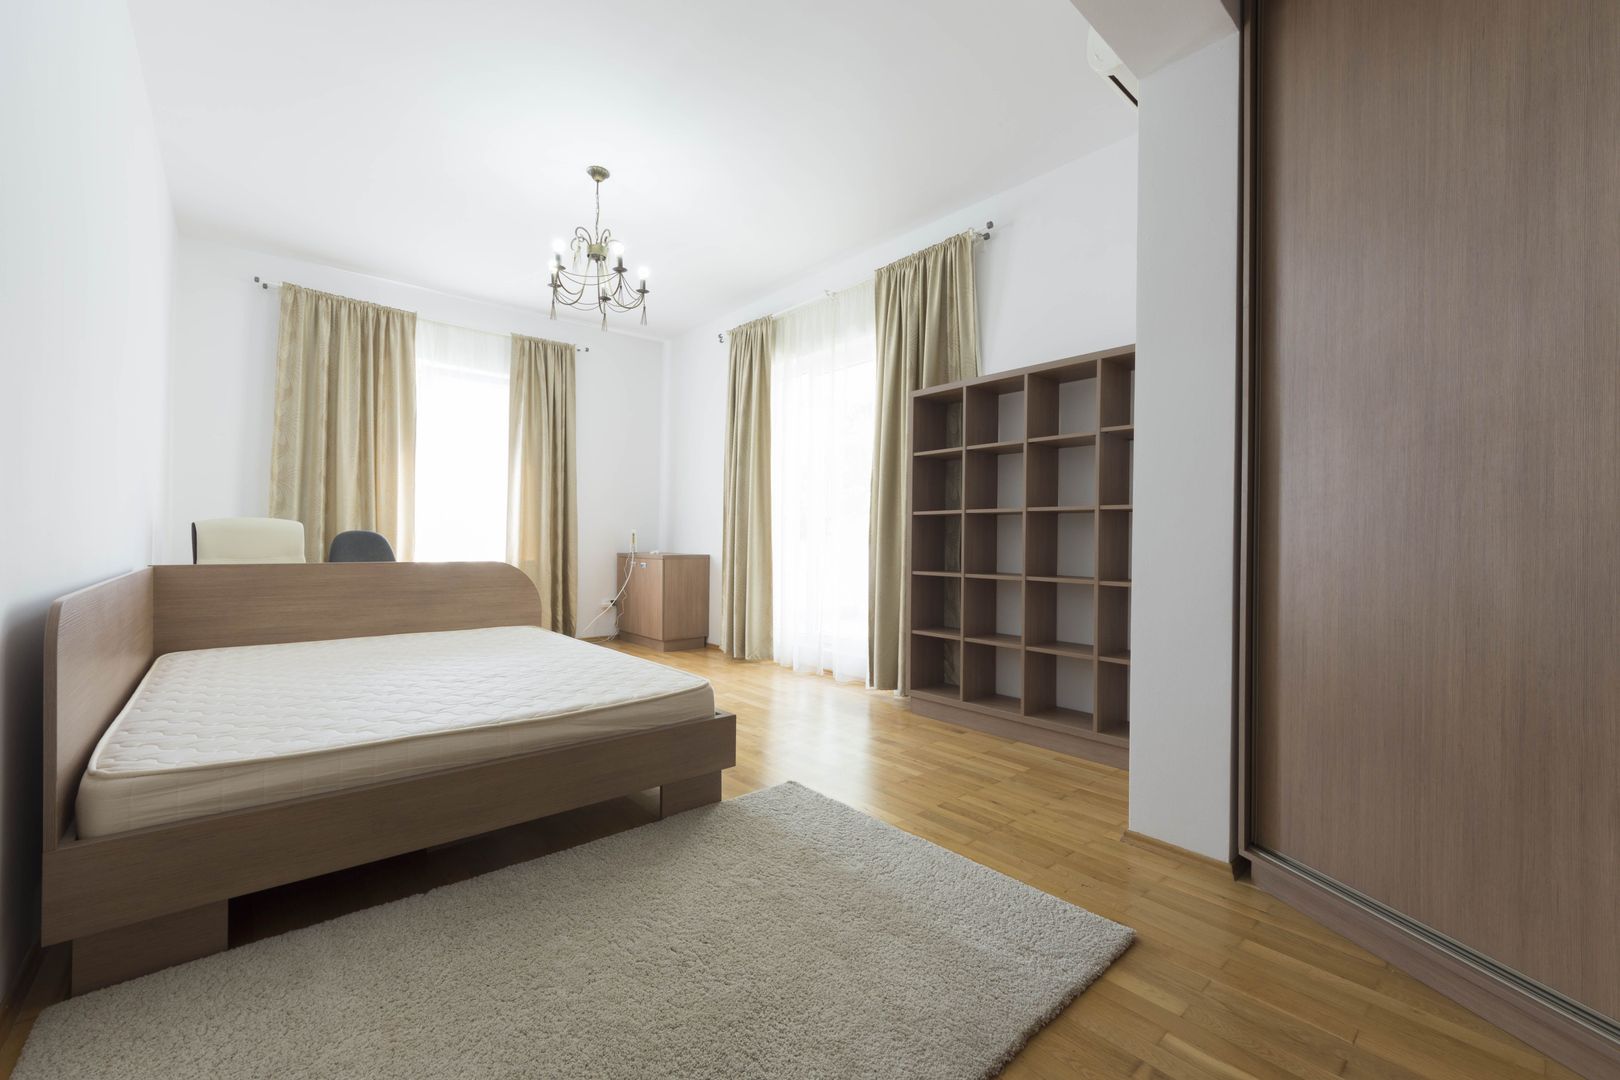 Laurier Suite, 4 rooms, Herastrau Parc, French Village, LUXURY